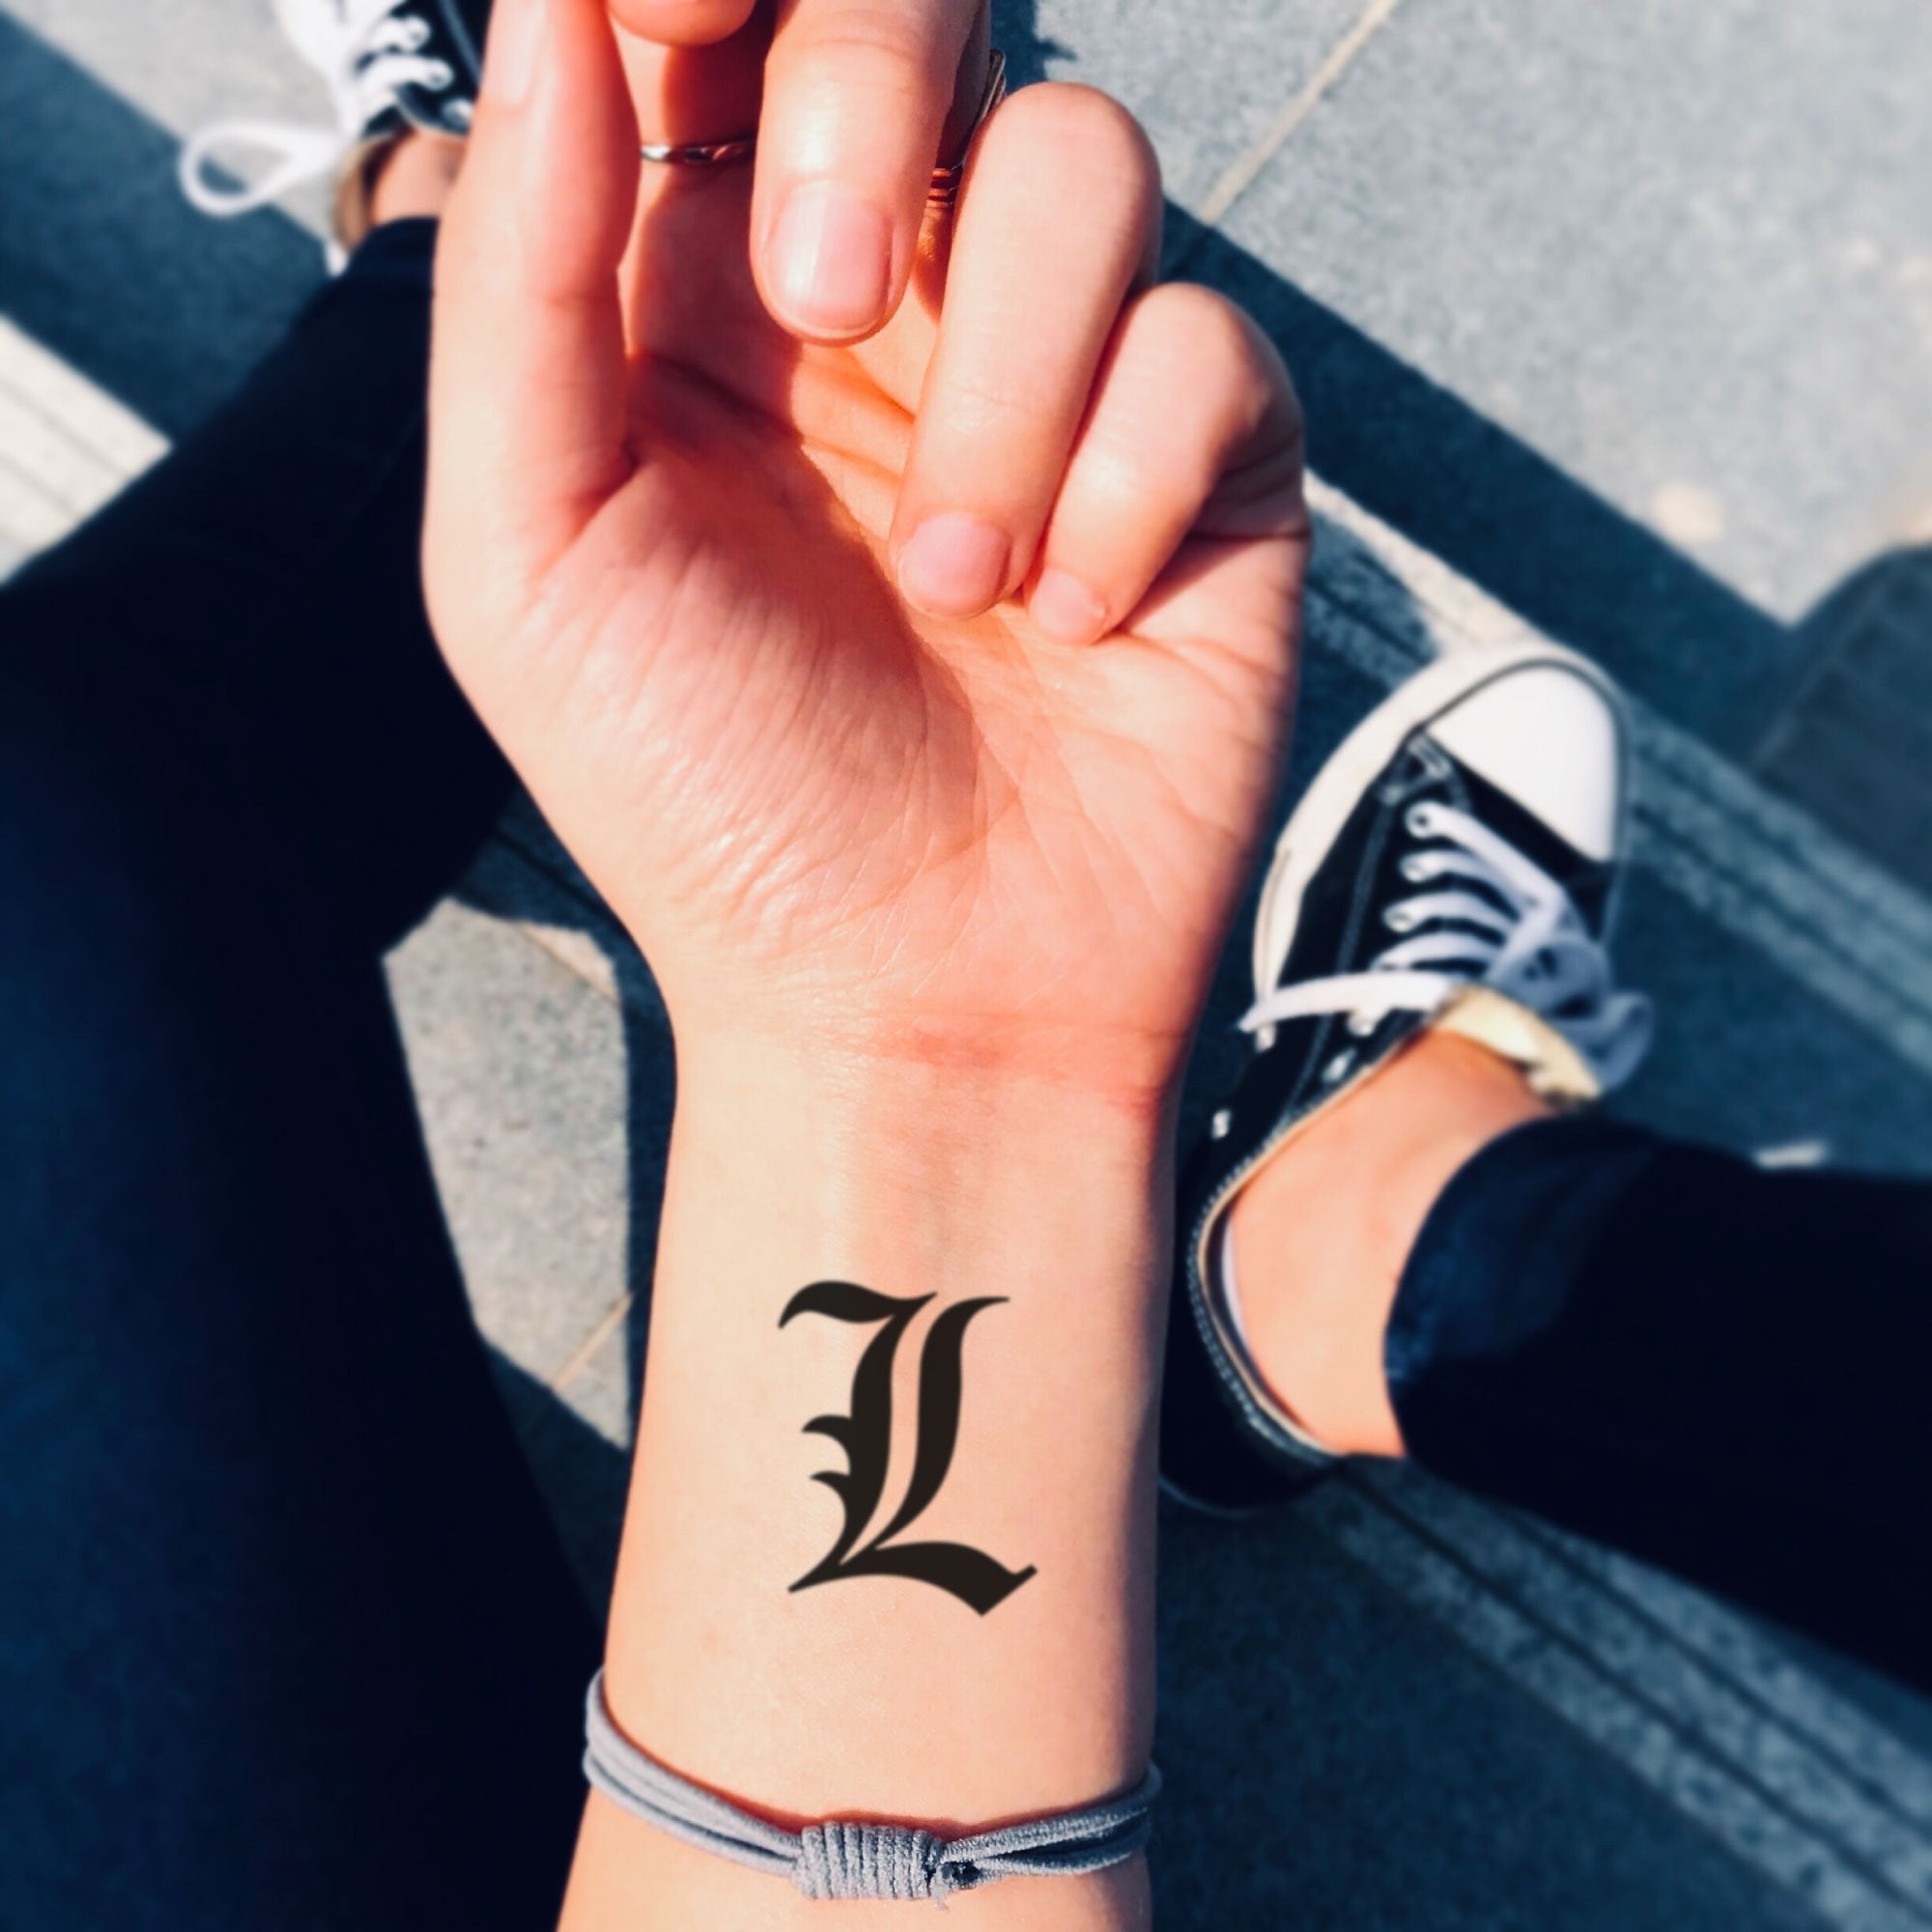 L name tattoo  L letter tattoo design  letter L tattoo on hand with pen   YouTube